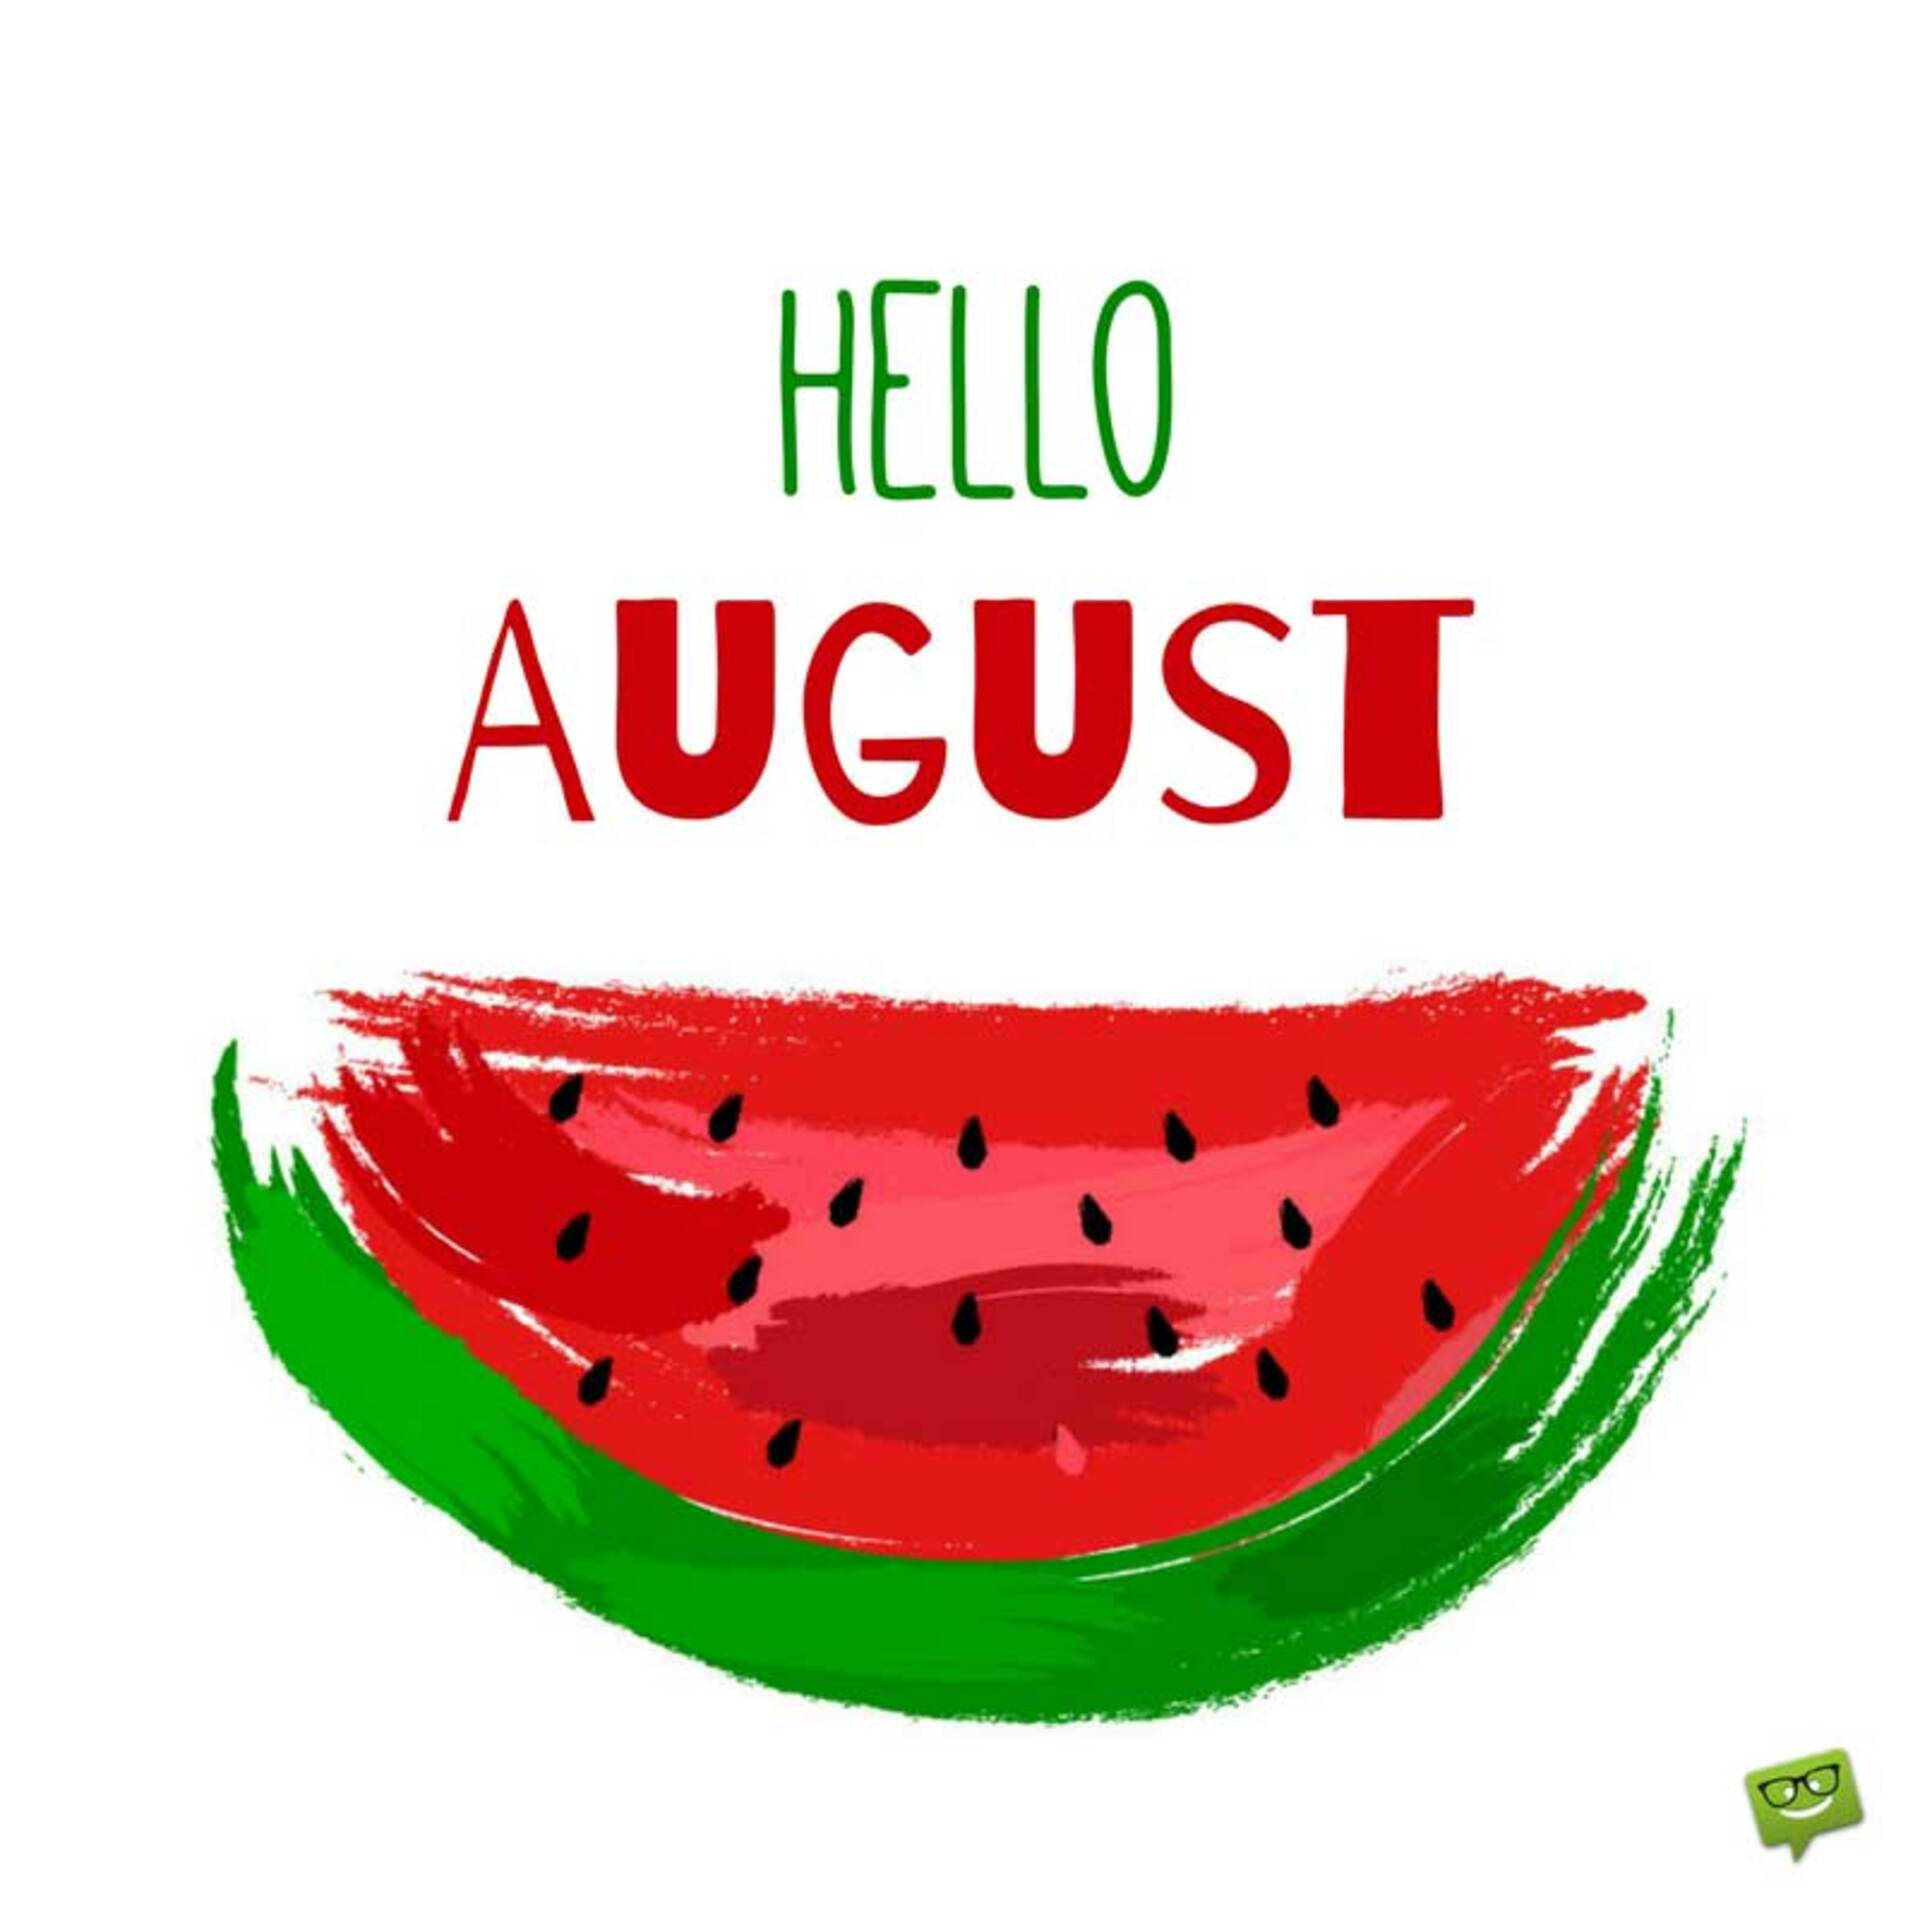 Enjoy the sweet watermelon of summer during the month of August Wallpaper